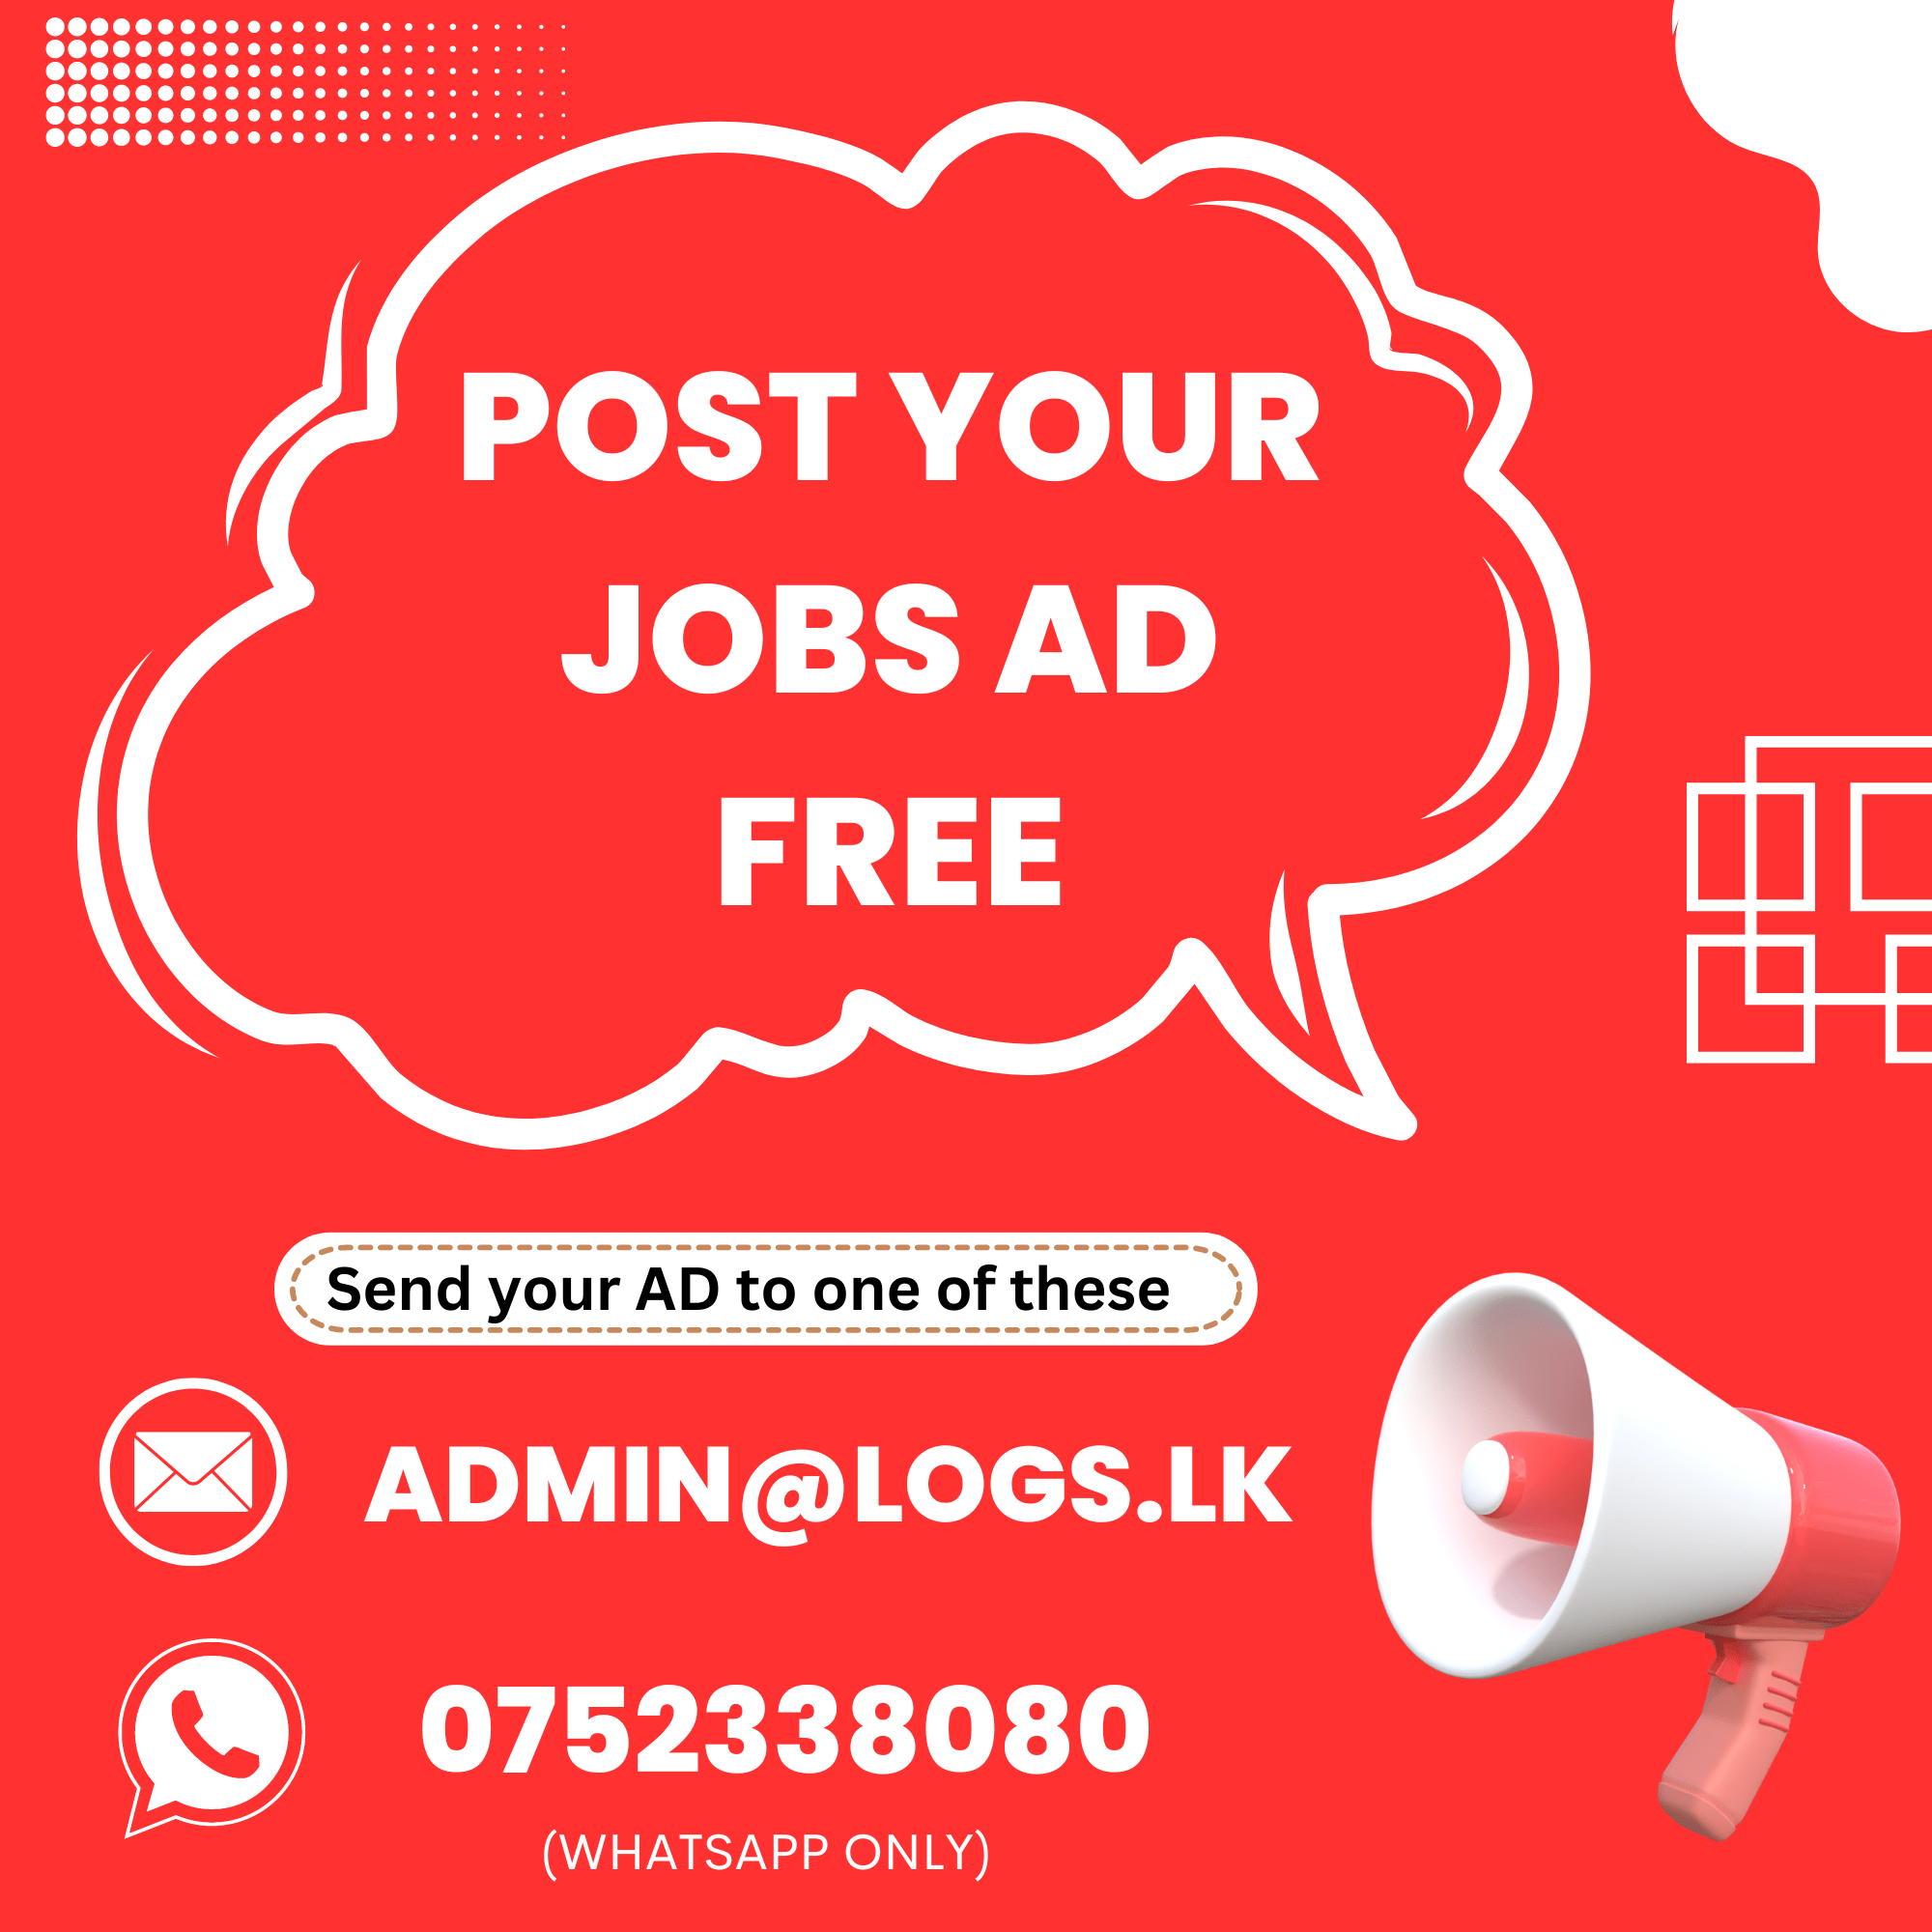 Post Your Jobs for Free